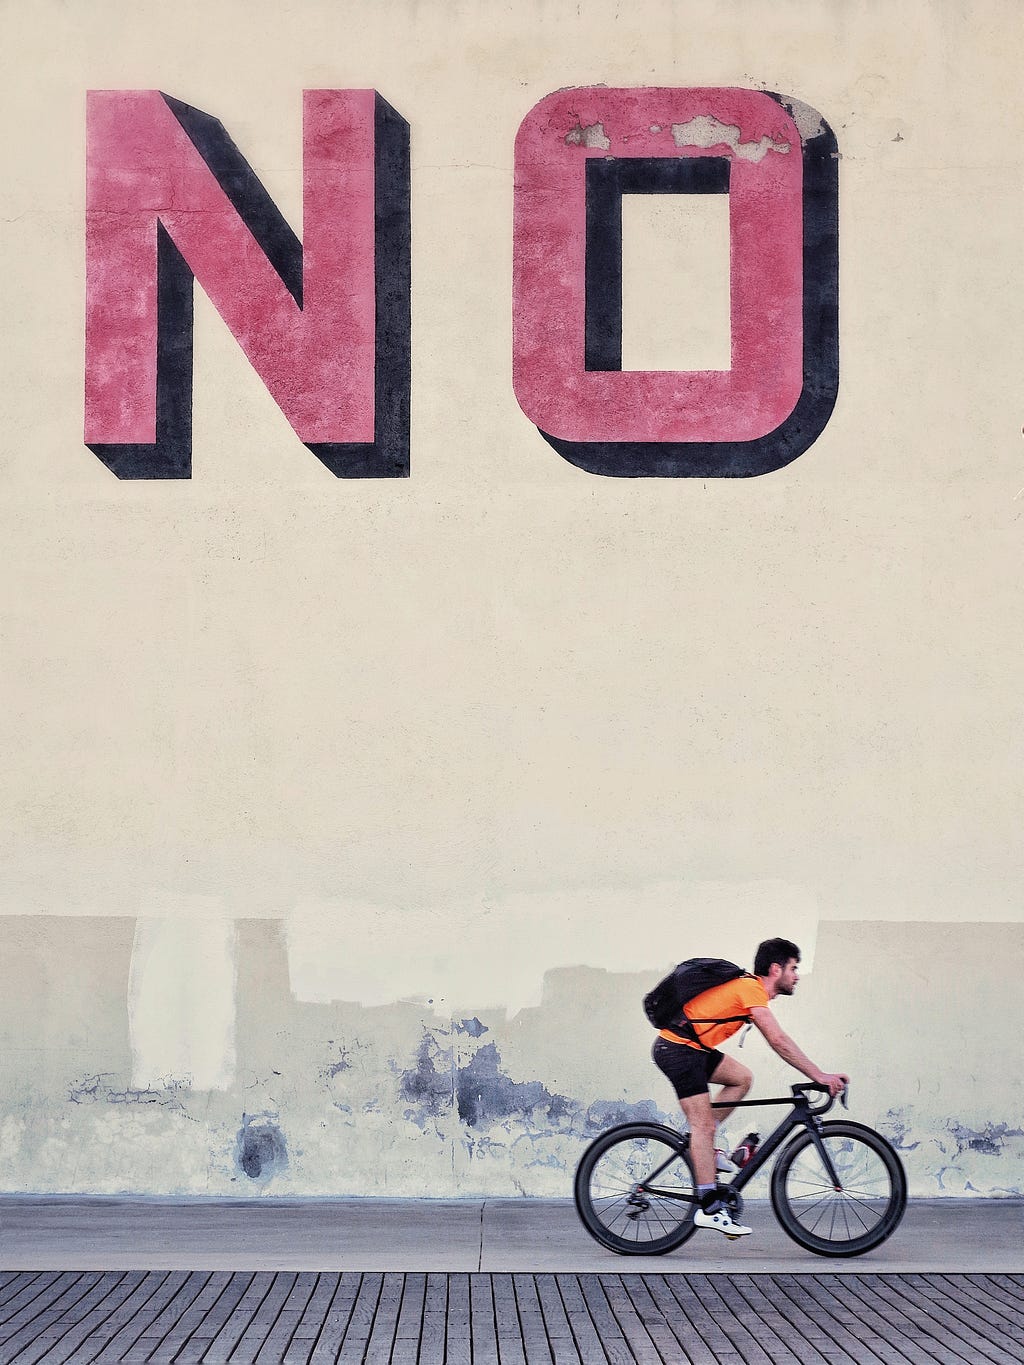 A picture with “NO” written on a wall while a biker rides ahead.